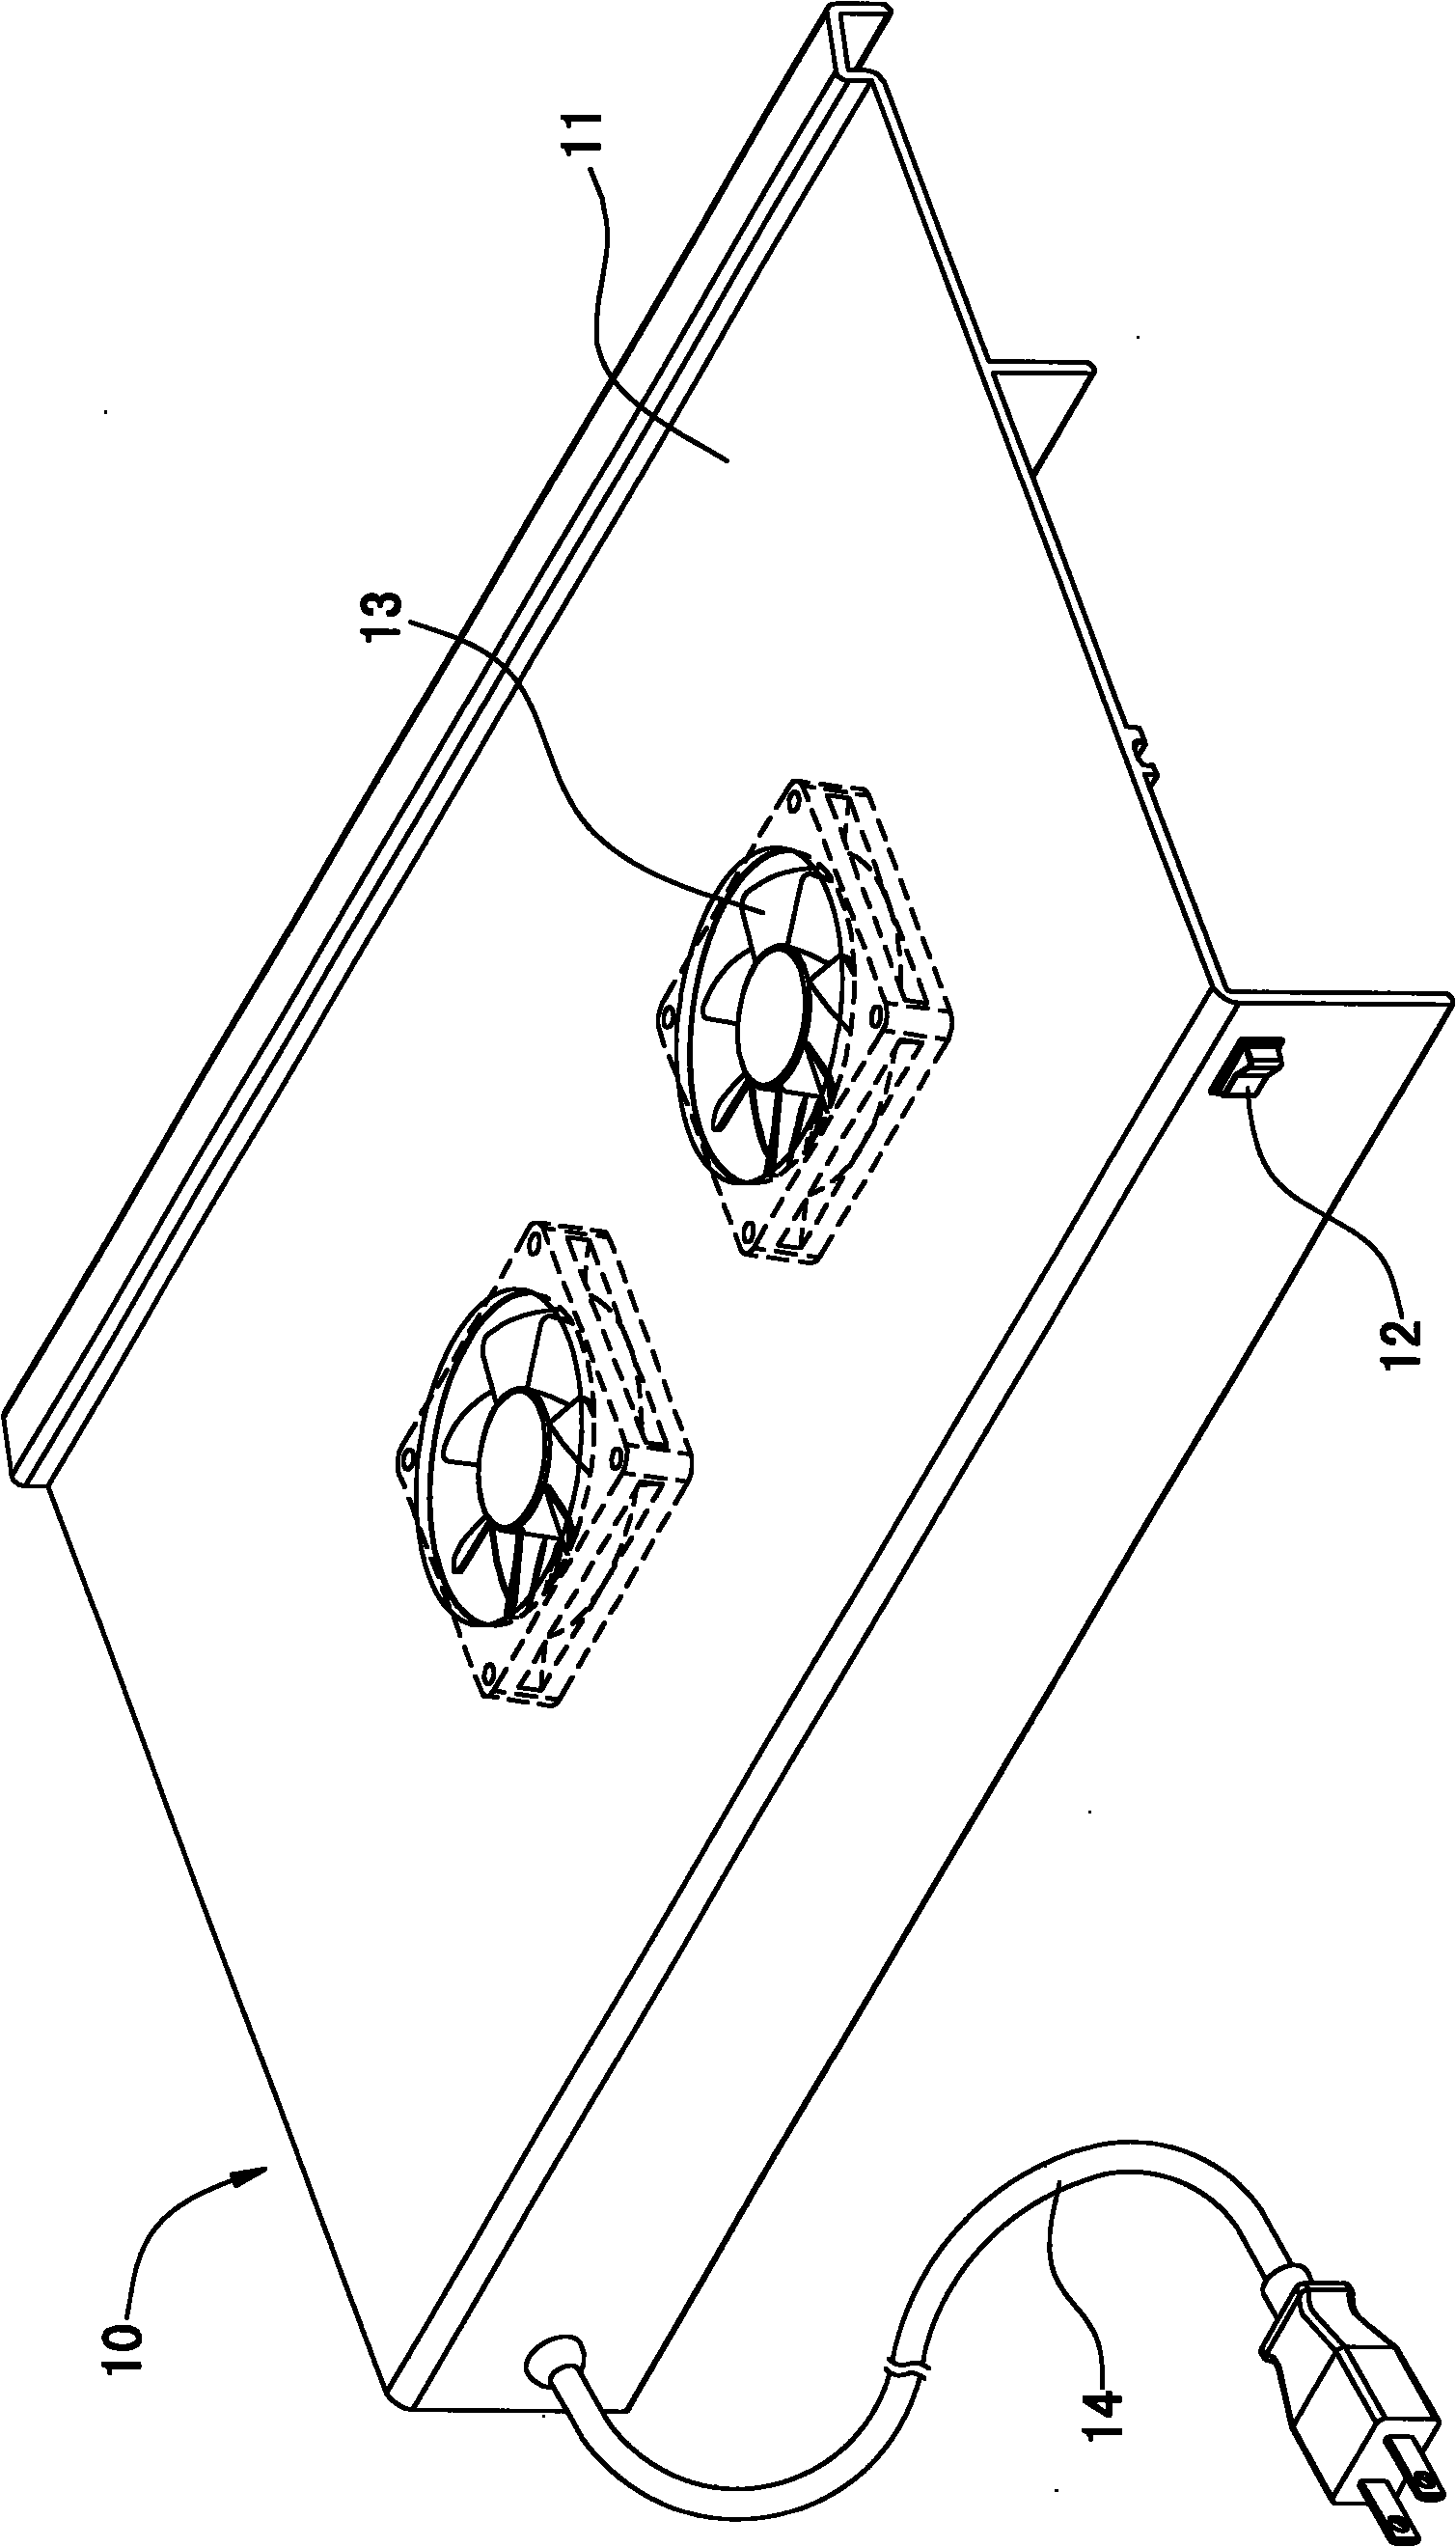 Radiating base and radiating base system capable of being automatically started or stopped and radiating method thereof